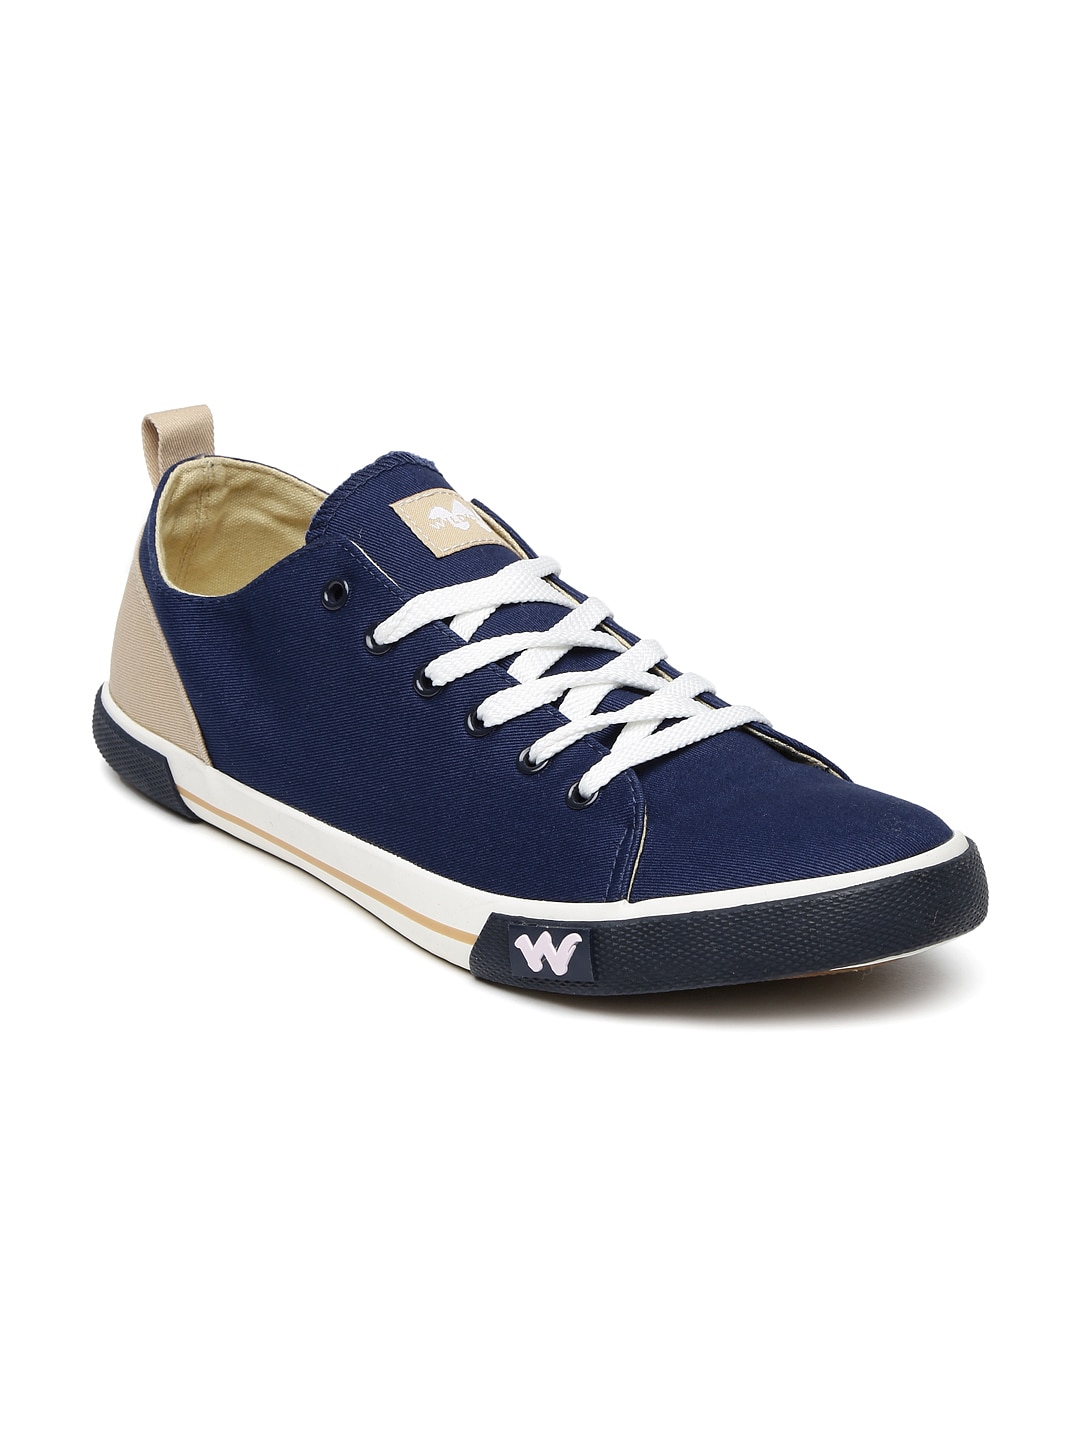 wildcraft canvas shoes off 56% - www 